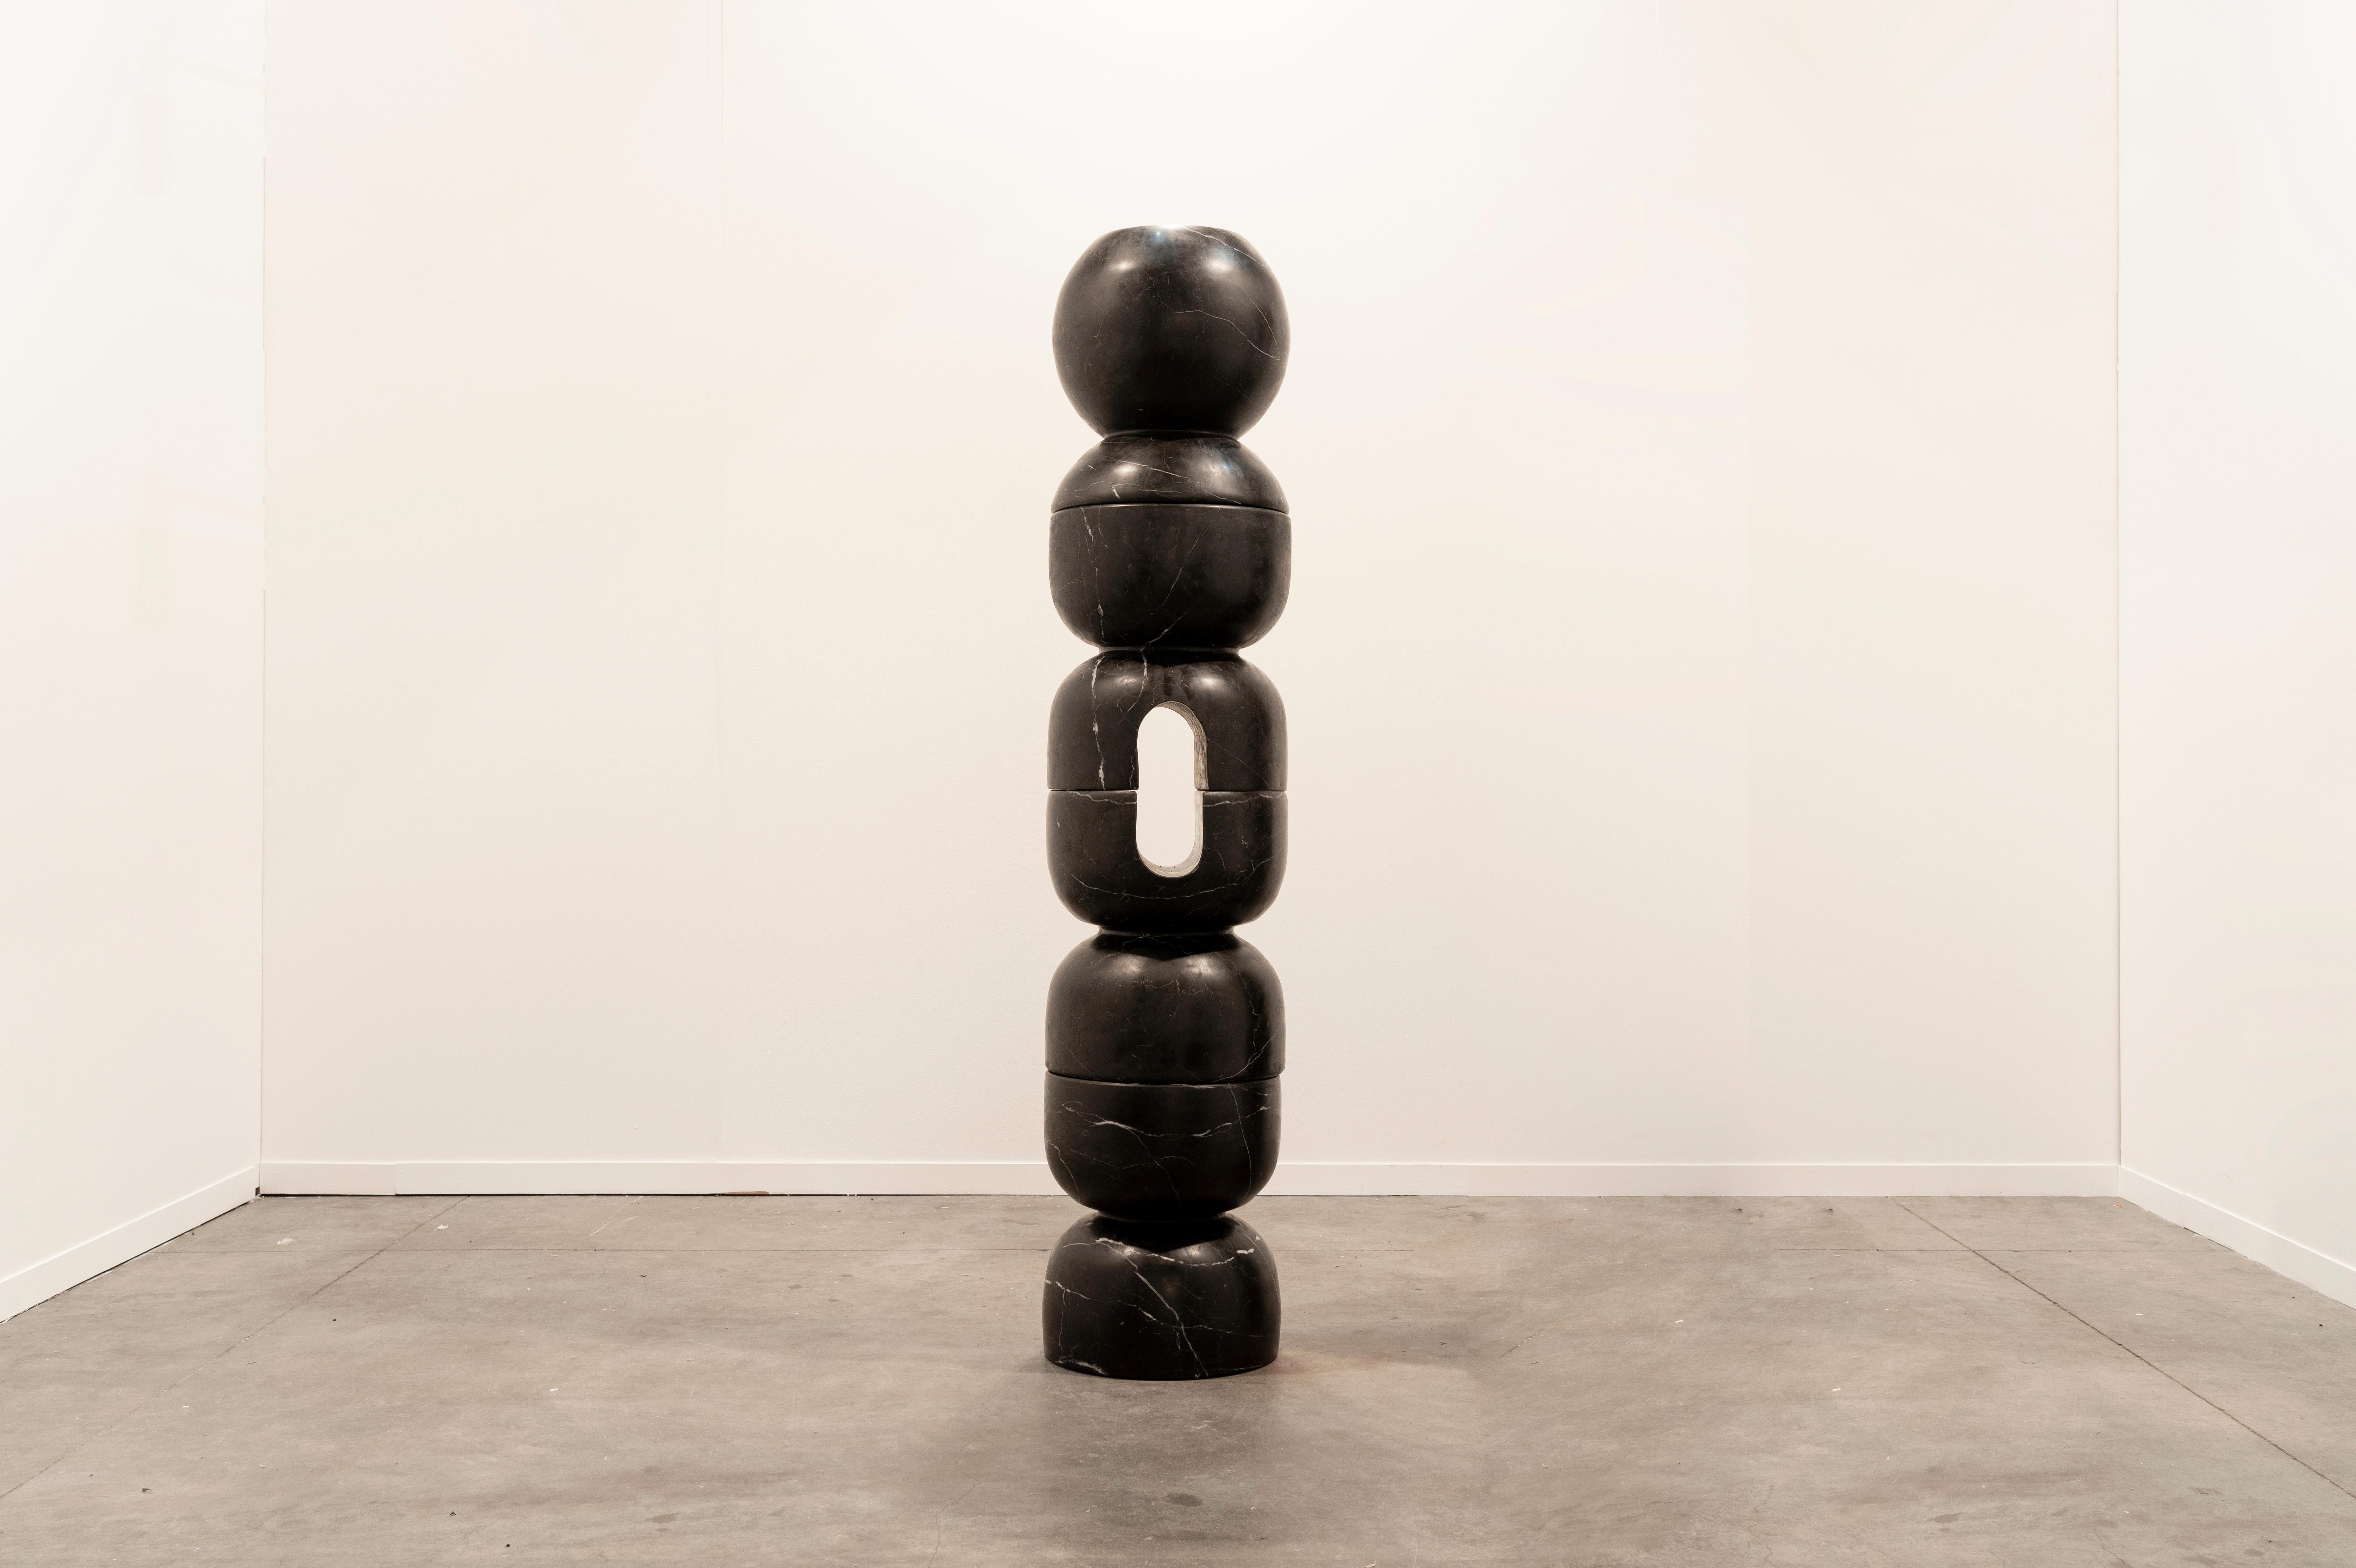 I. ABOUT REBECA CORS
Rebeca Cors (México, 1988). 
Her work oscillates between sculpture and utility object, studying the limits and meeting points between these two concepts. The intention of her work is to question paradigms in order to reinterpret